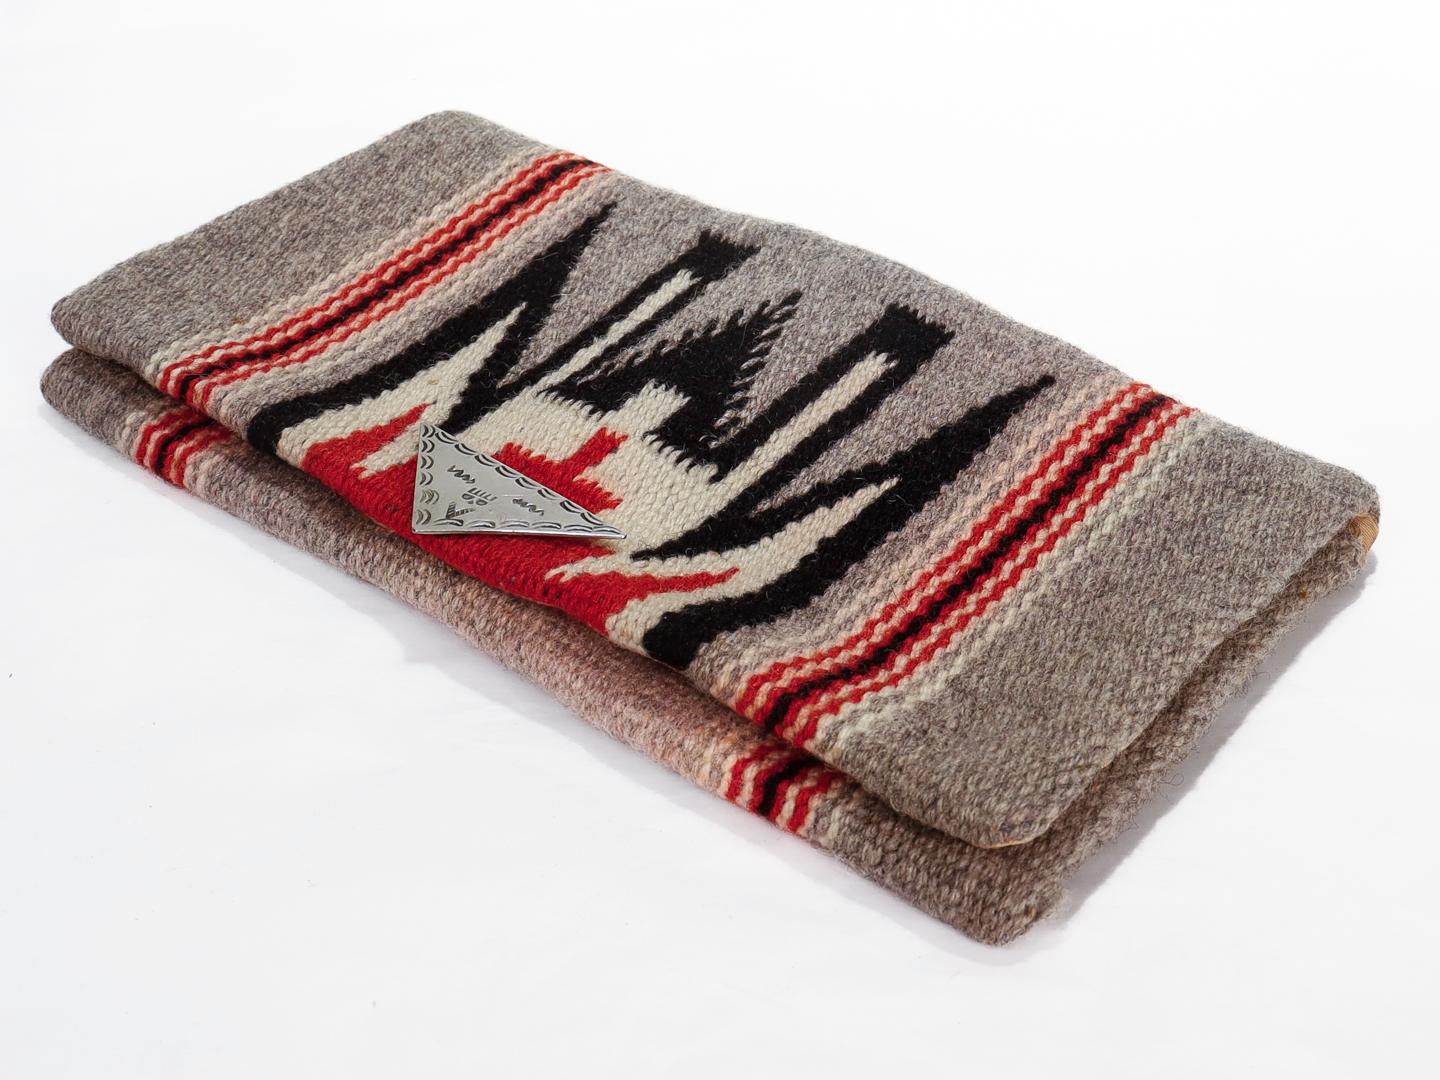 A fine Native American woven purse.

From Chimayo (a region inhabited by Pueblo Indians since about 1200 CE).

Dating from the 1940s - 1950s.

Principally in gray wool with red, white and black highlights. 

Lined with a silk lining and a steel